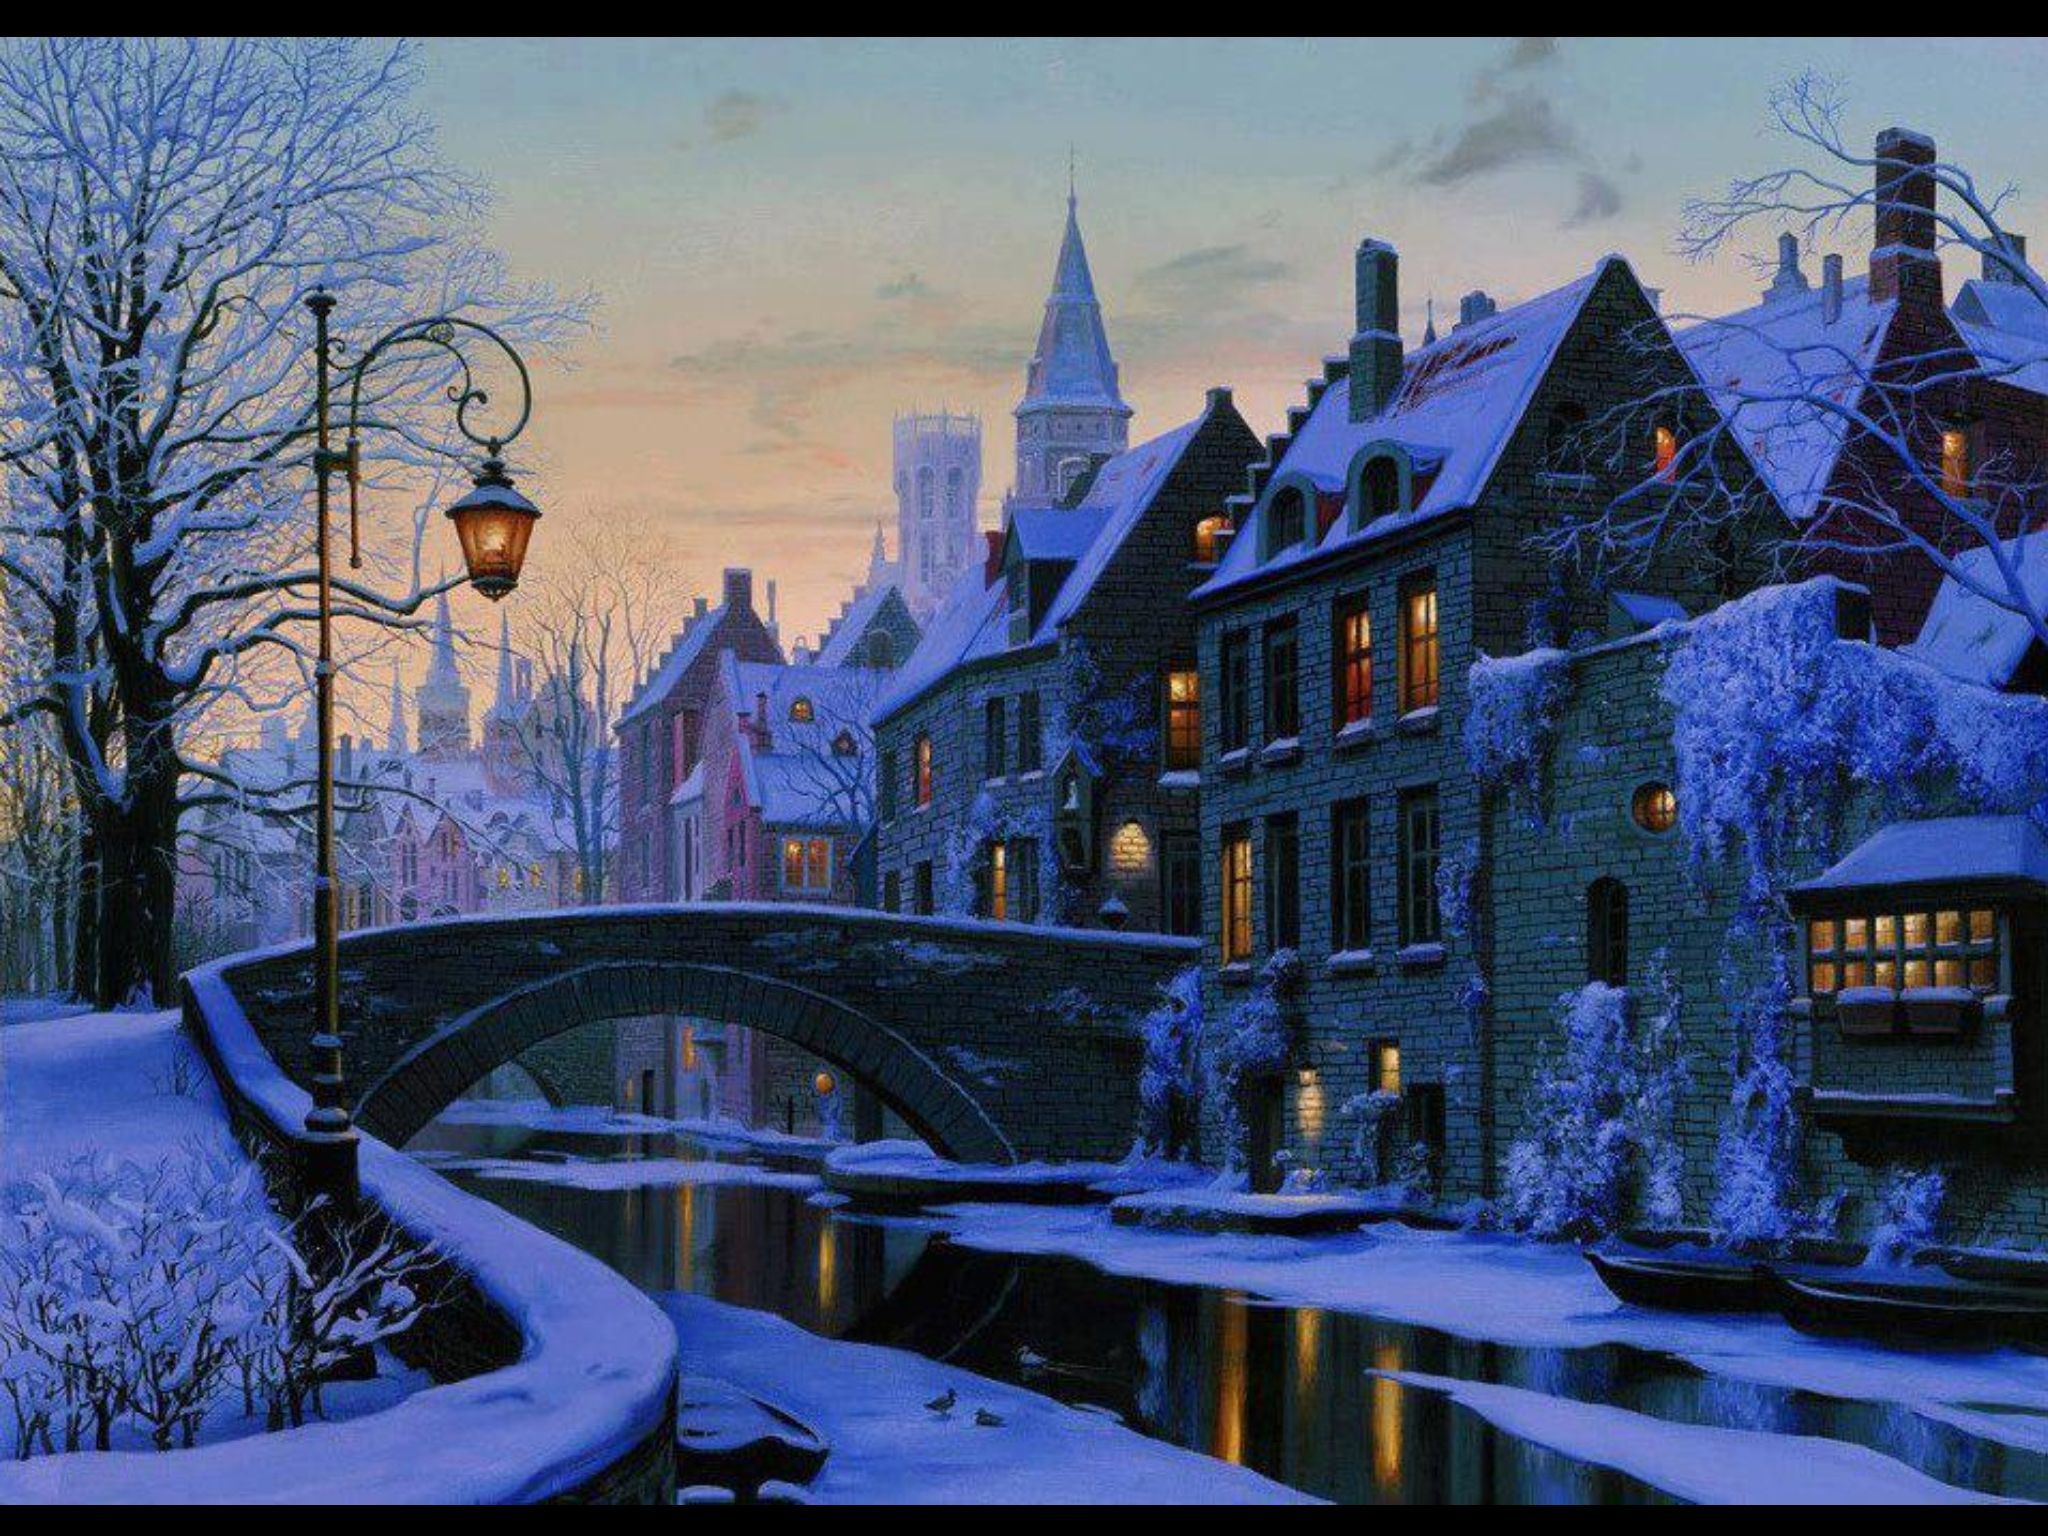 Winter in a European village. City painting, Wonders of the world, Winter scenes